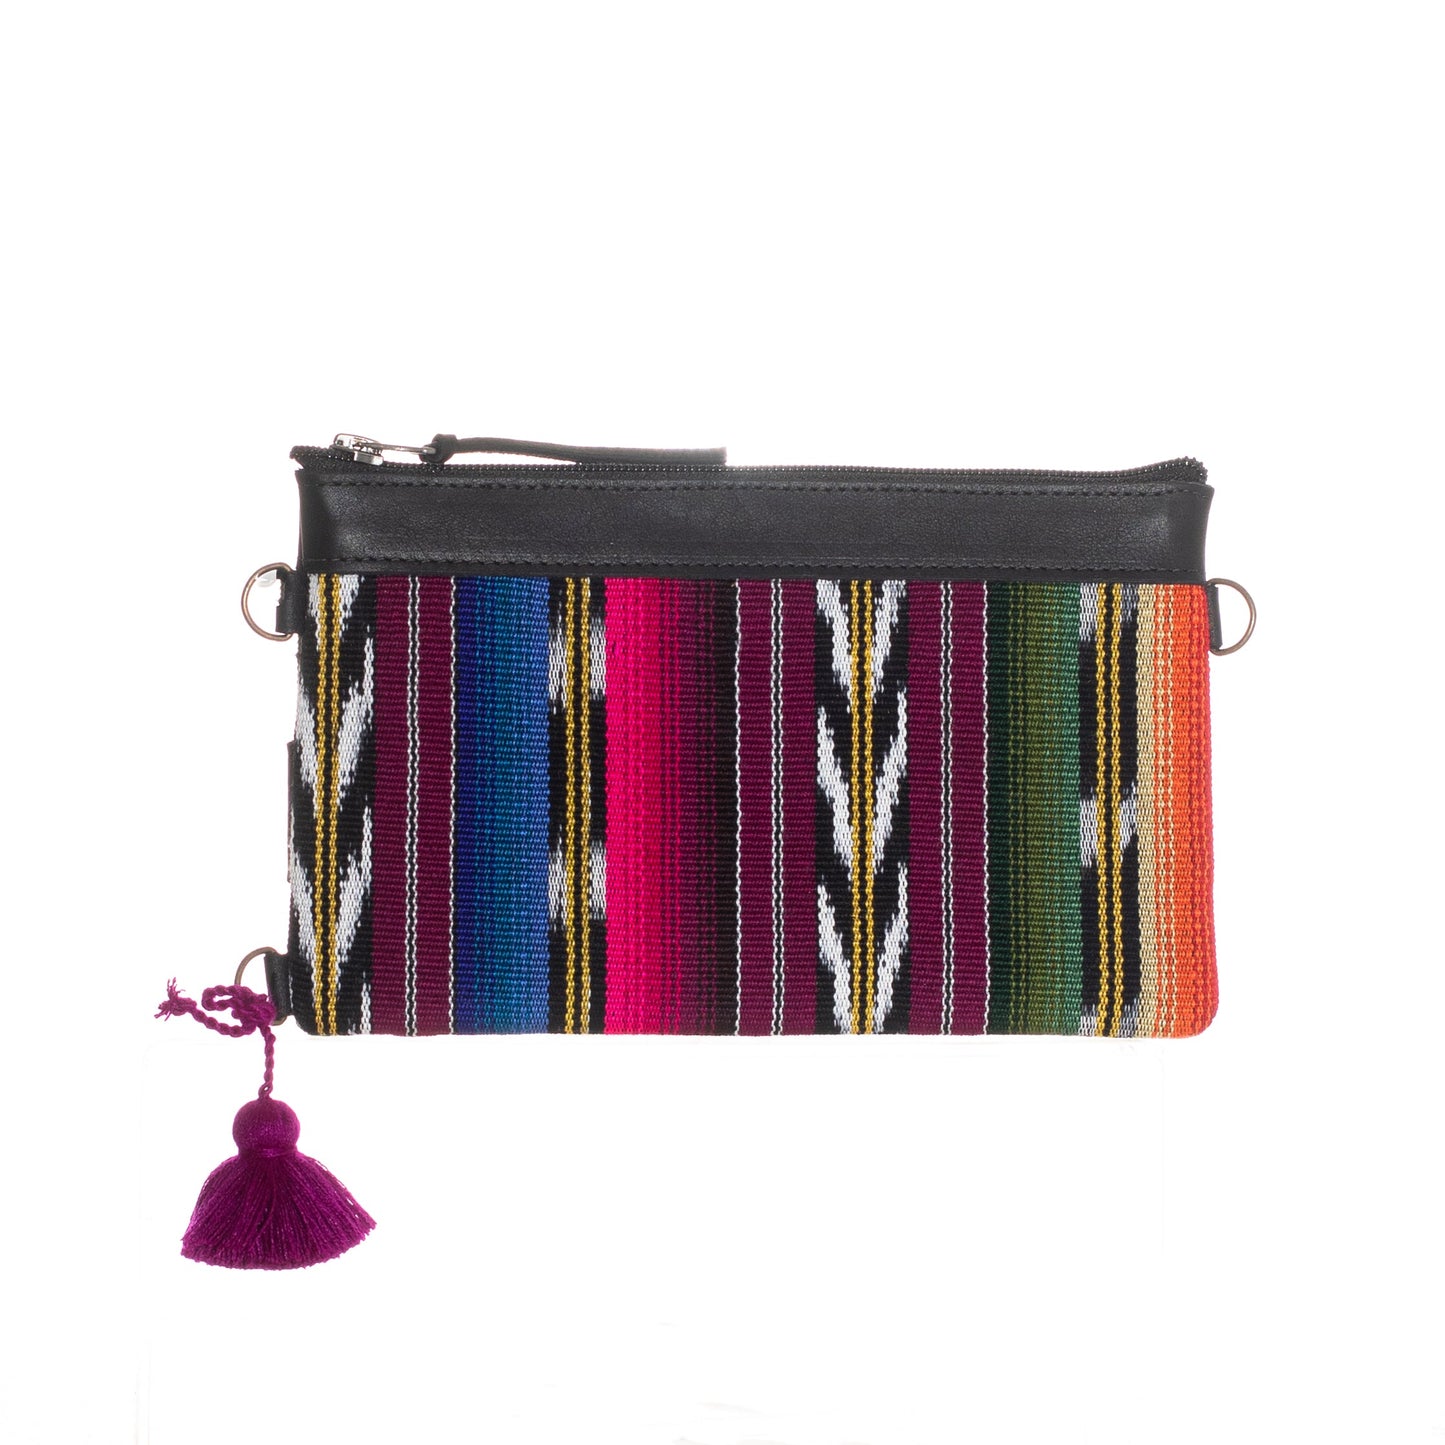 EVERYTHING CLUTCH WITH 3 D-RINGS - ARTISAN COLLECTION - RAINBOW FALLS - BLACK LEATHER